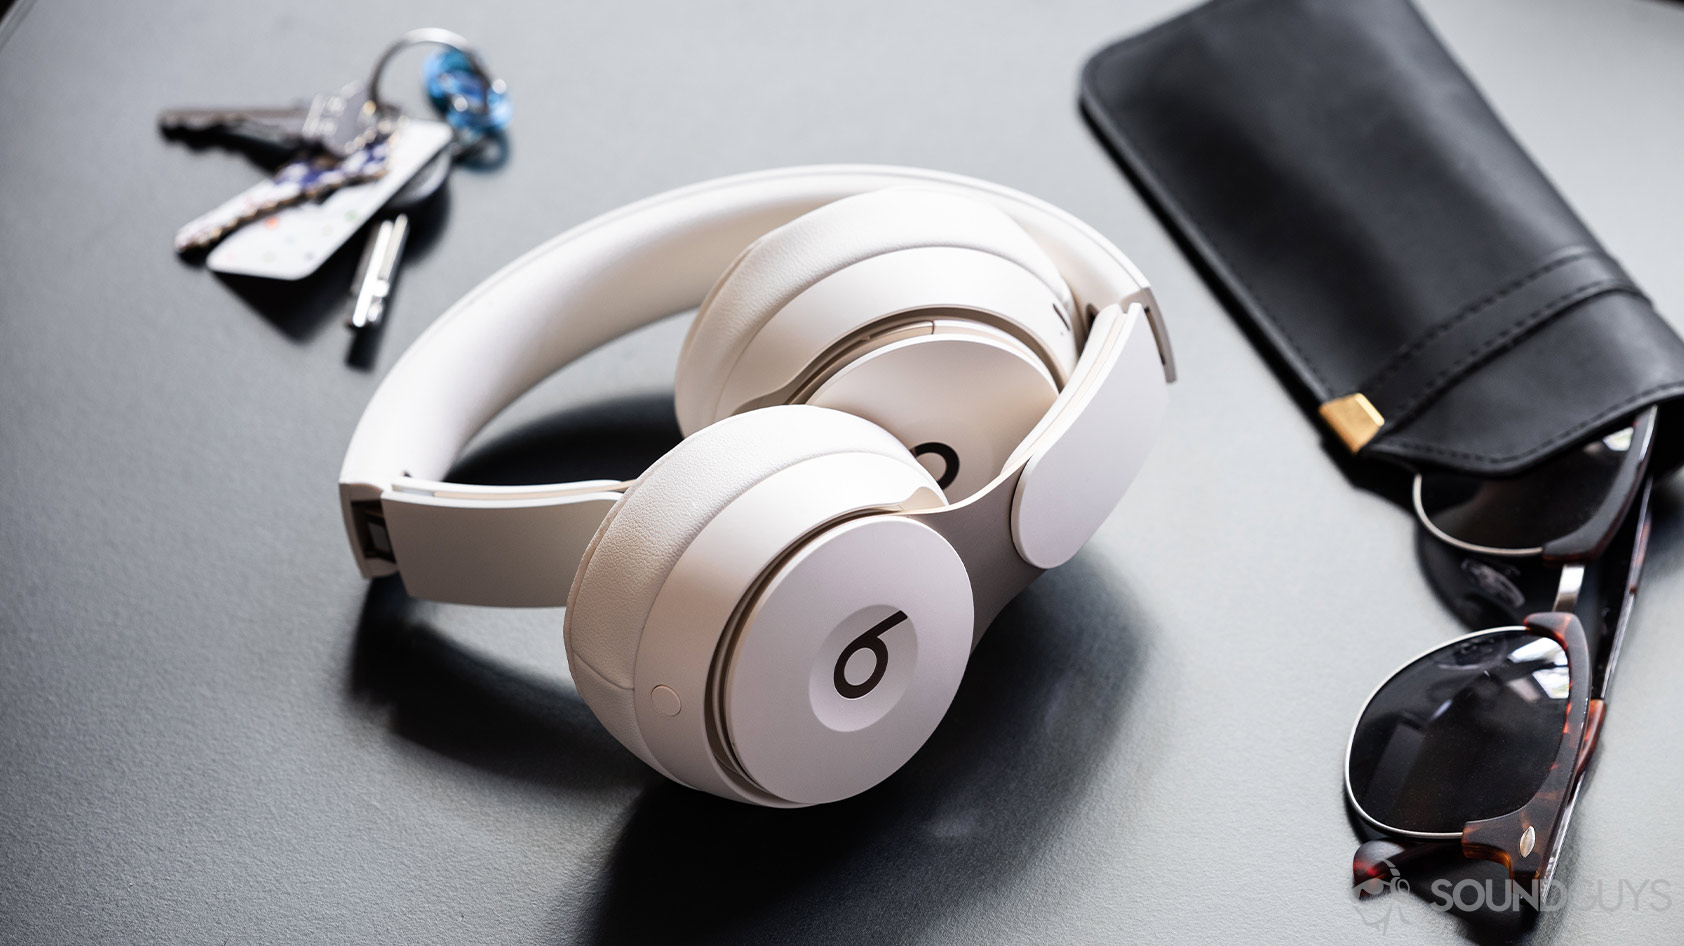 Beats Solo Pro review: Good but discontinued - SoundGuys